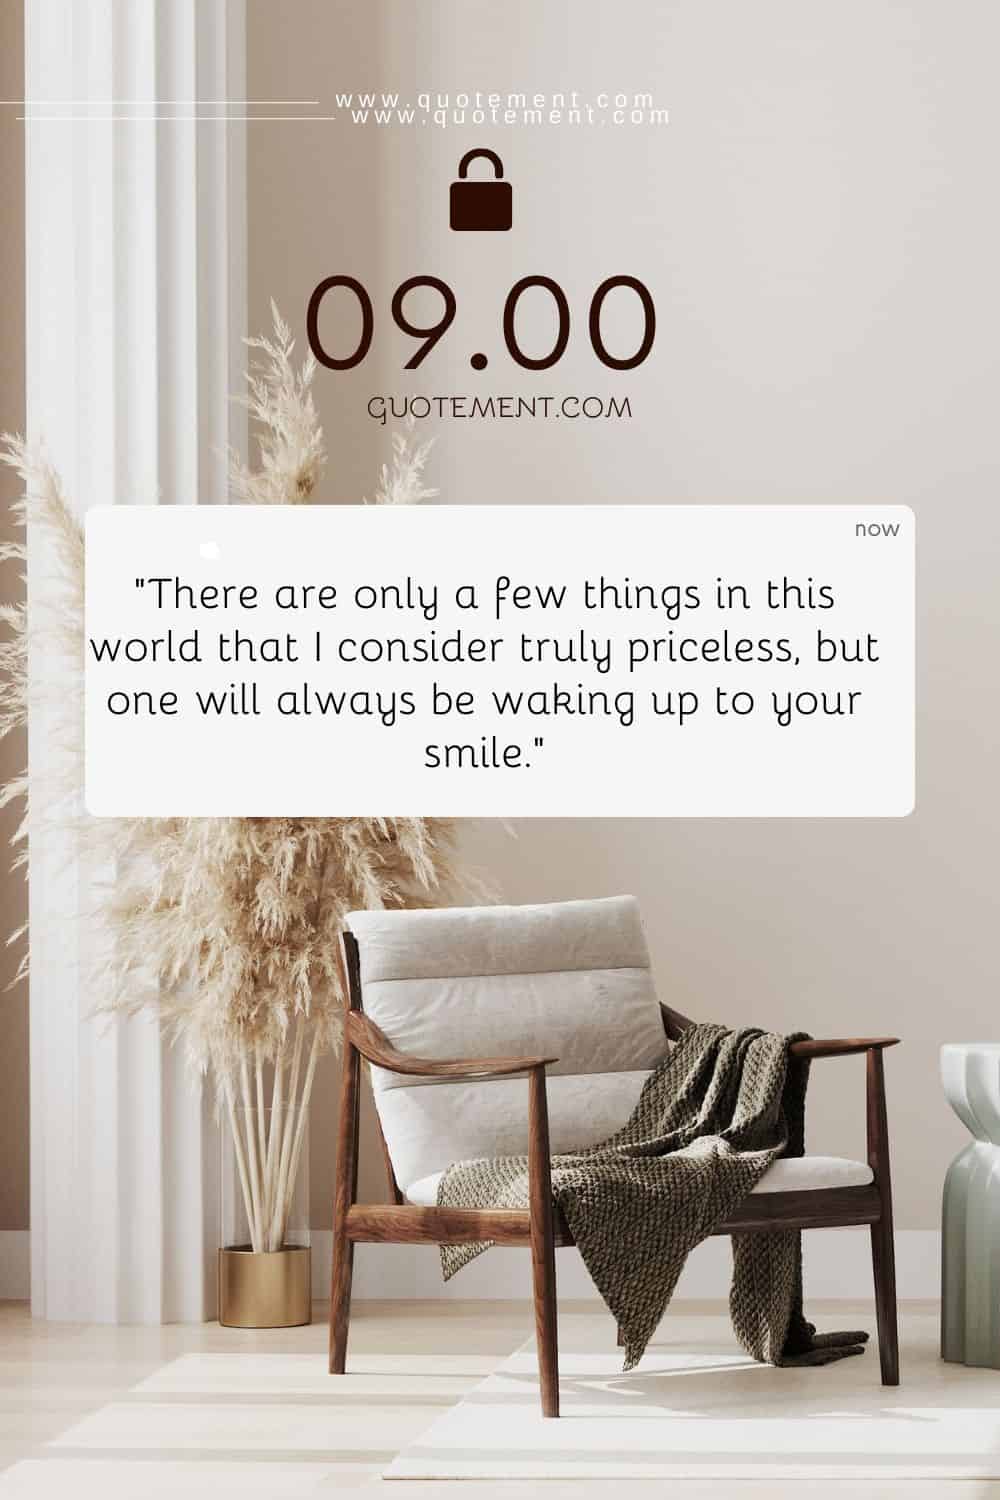 phone screen image of a cozy Scandinavian home setting featuring a message in a box